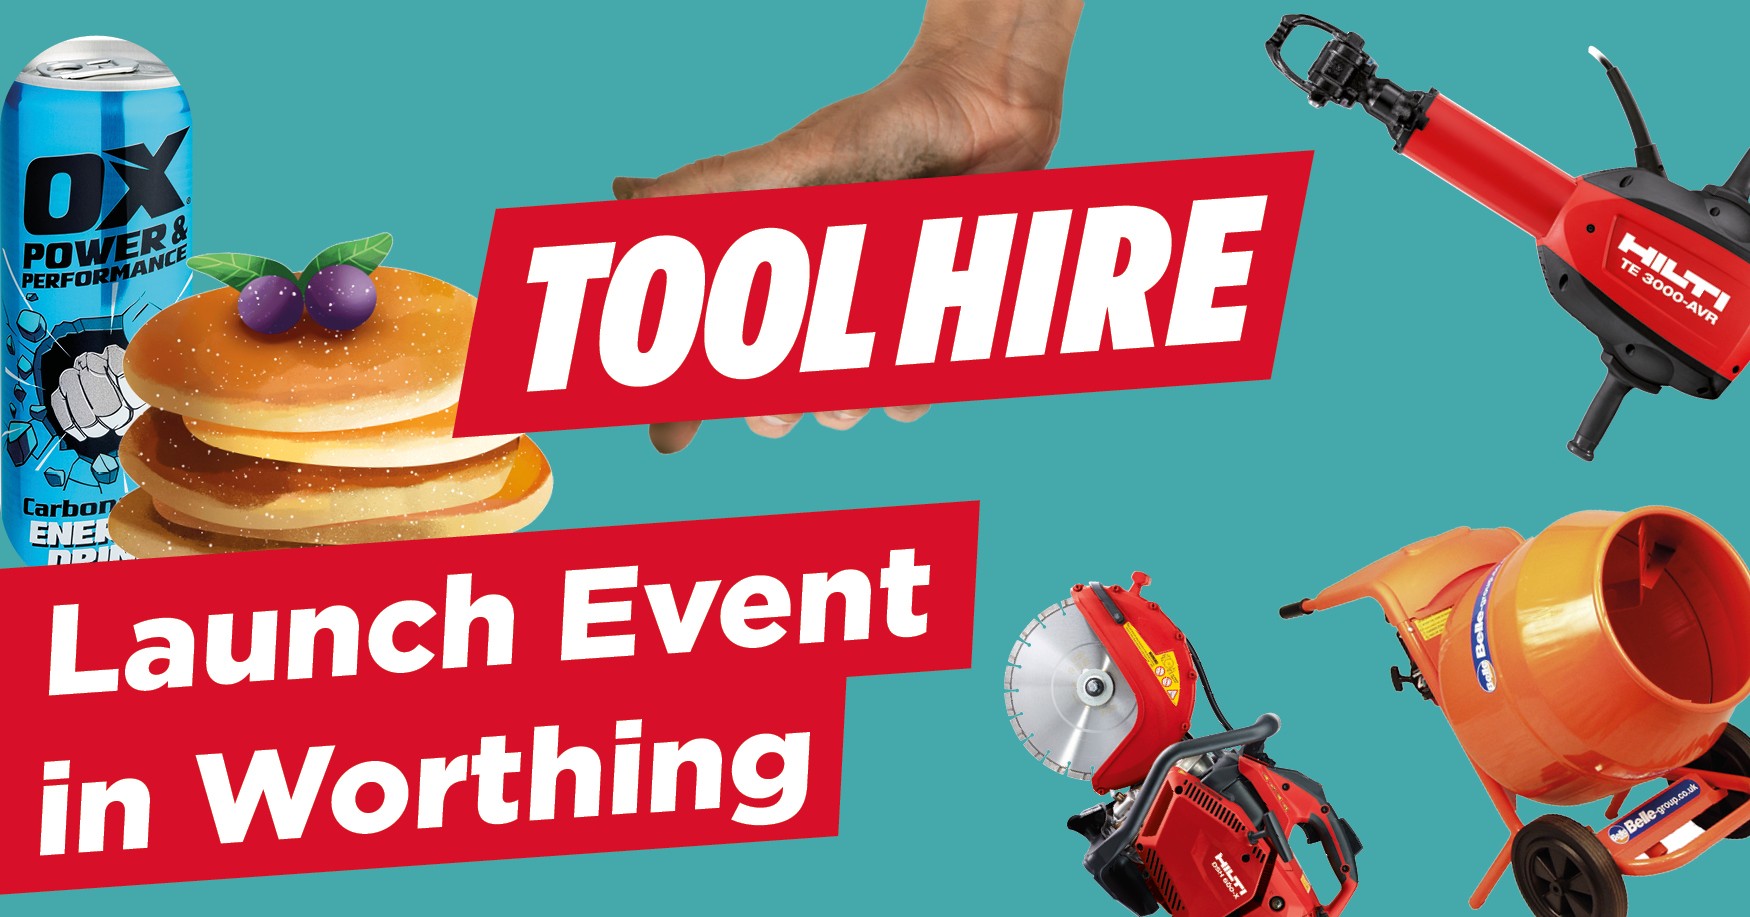 Tool Hire Launch Event Announced for Worthing